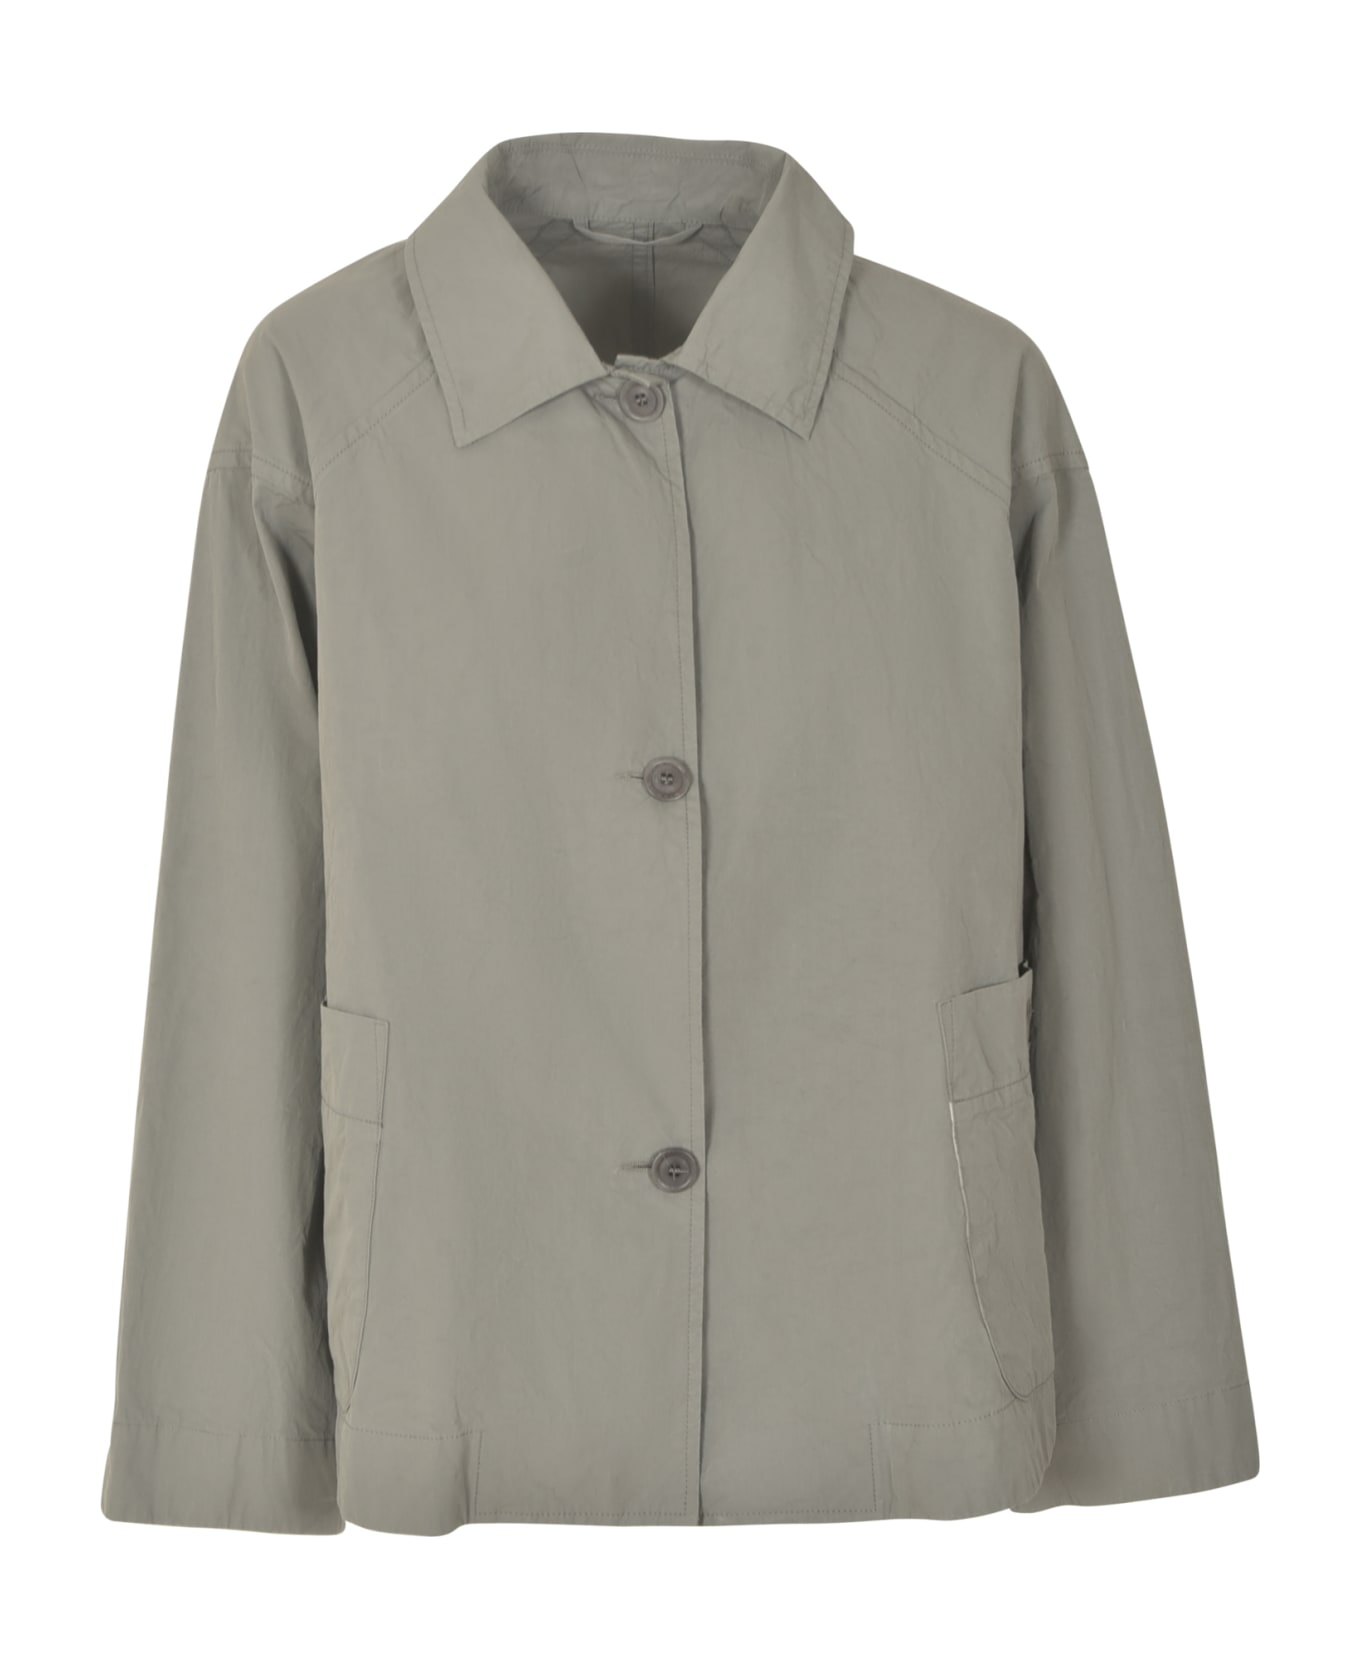 Casey Casey Patched Pocket Buttoned Plain Shirt - Light Grey